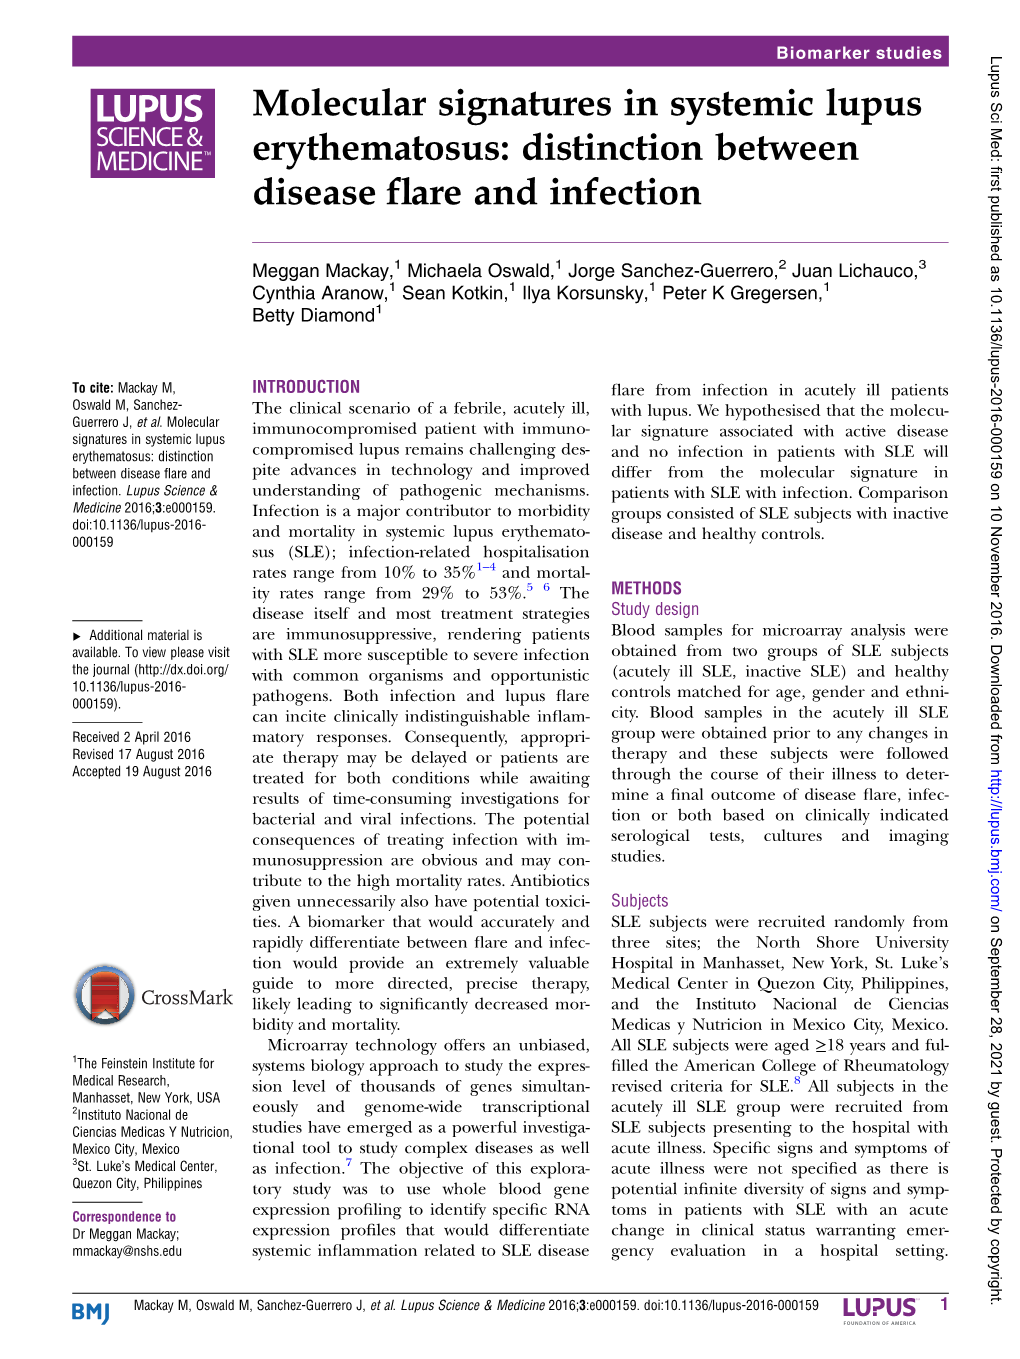 Distinction Between Disease Flare and Infection